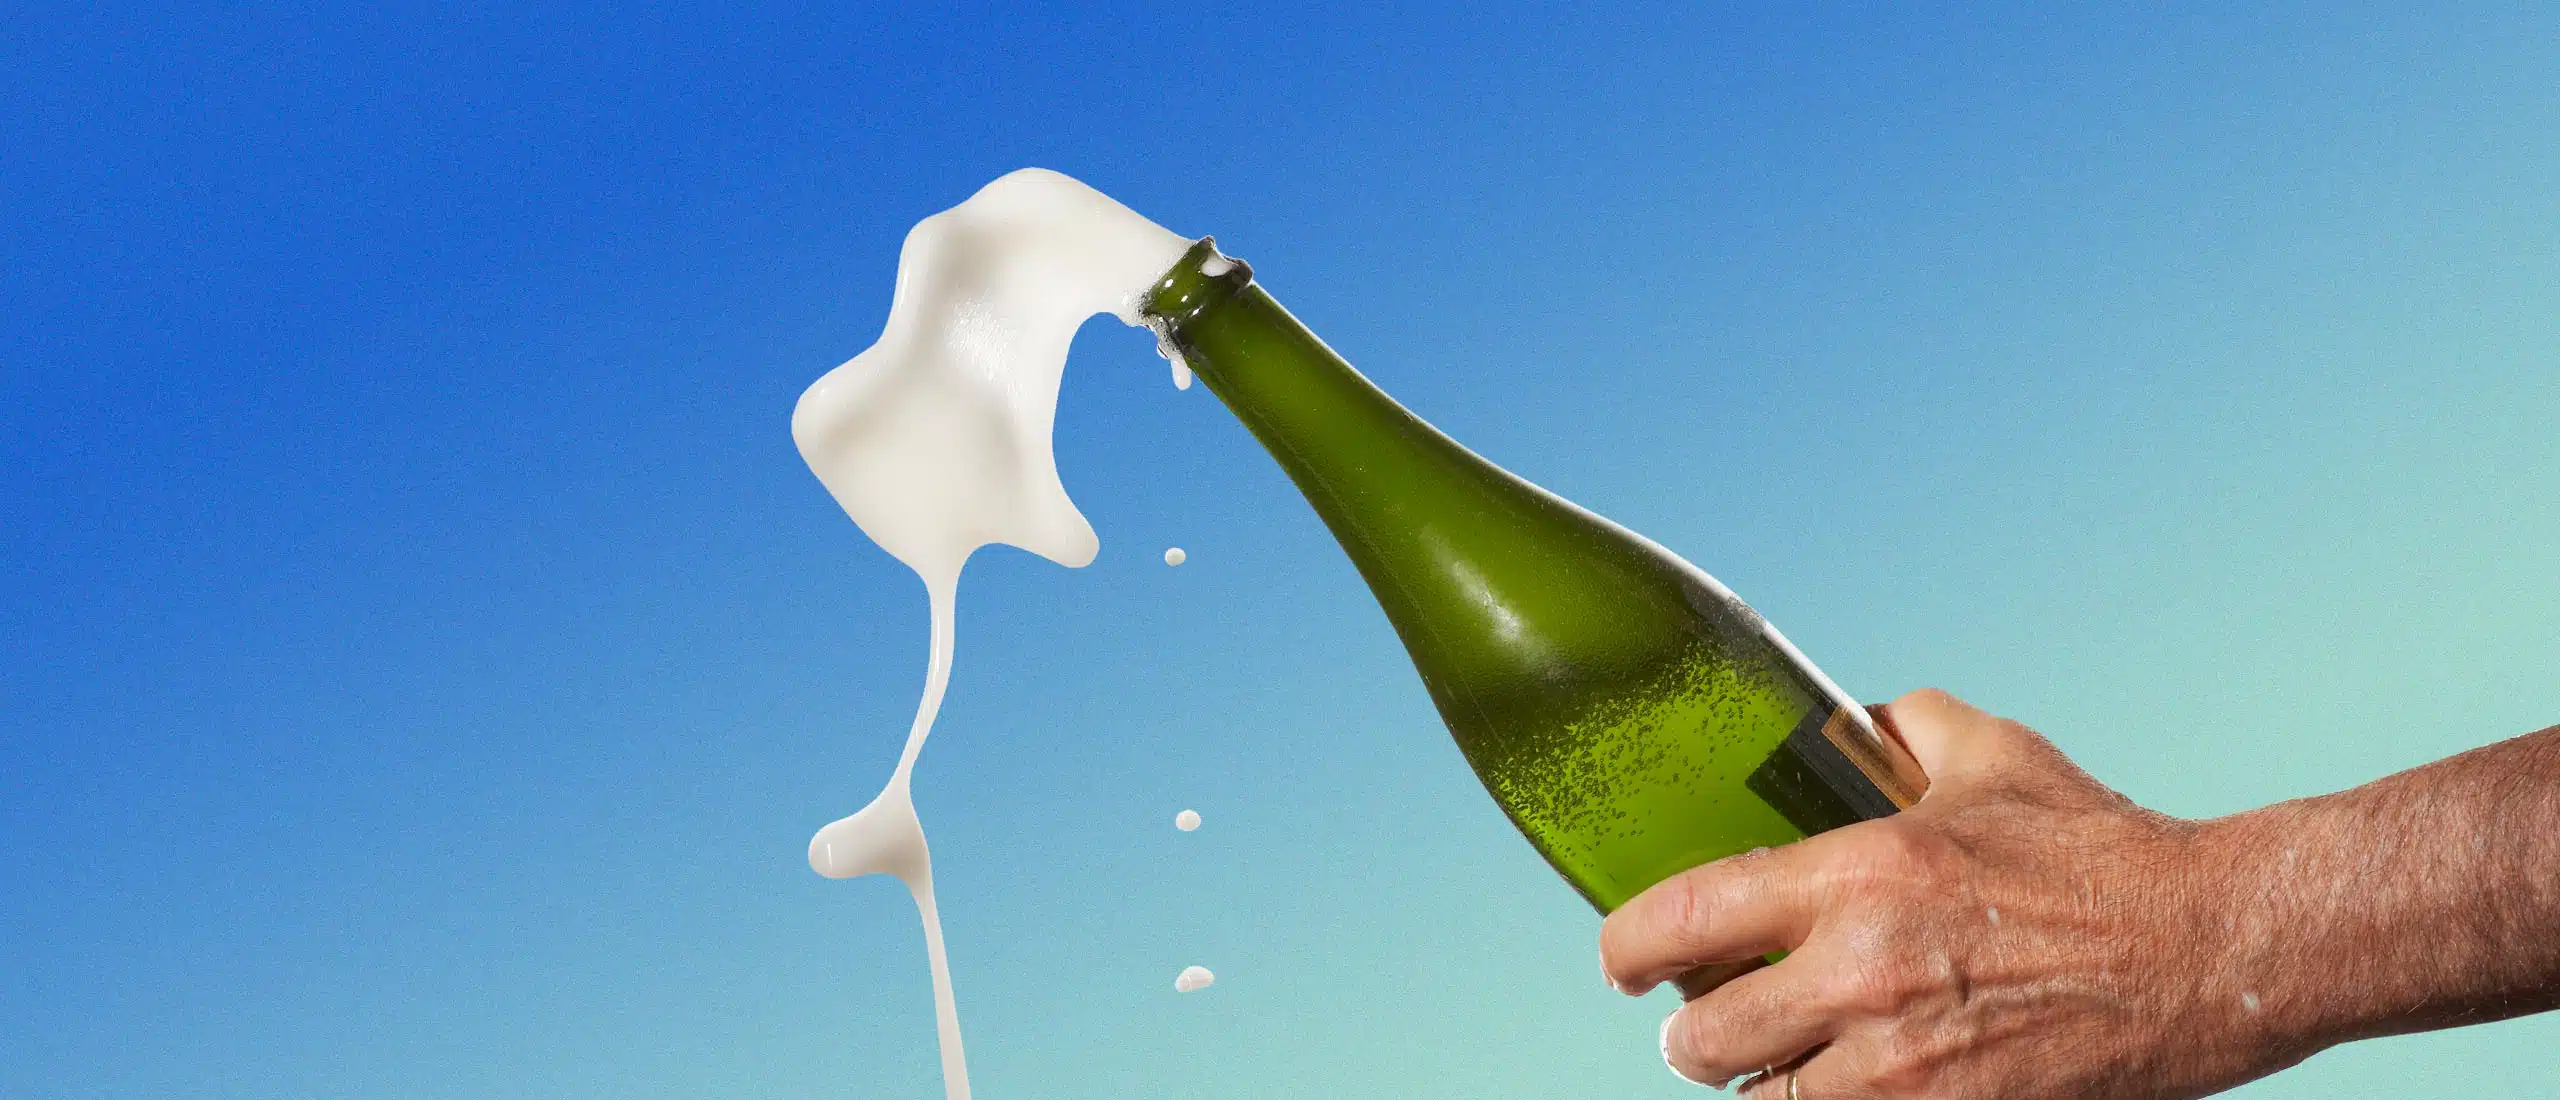 Hands popping a champagne bottle with foam exploding out of the top.